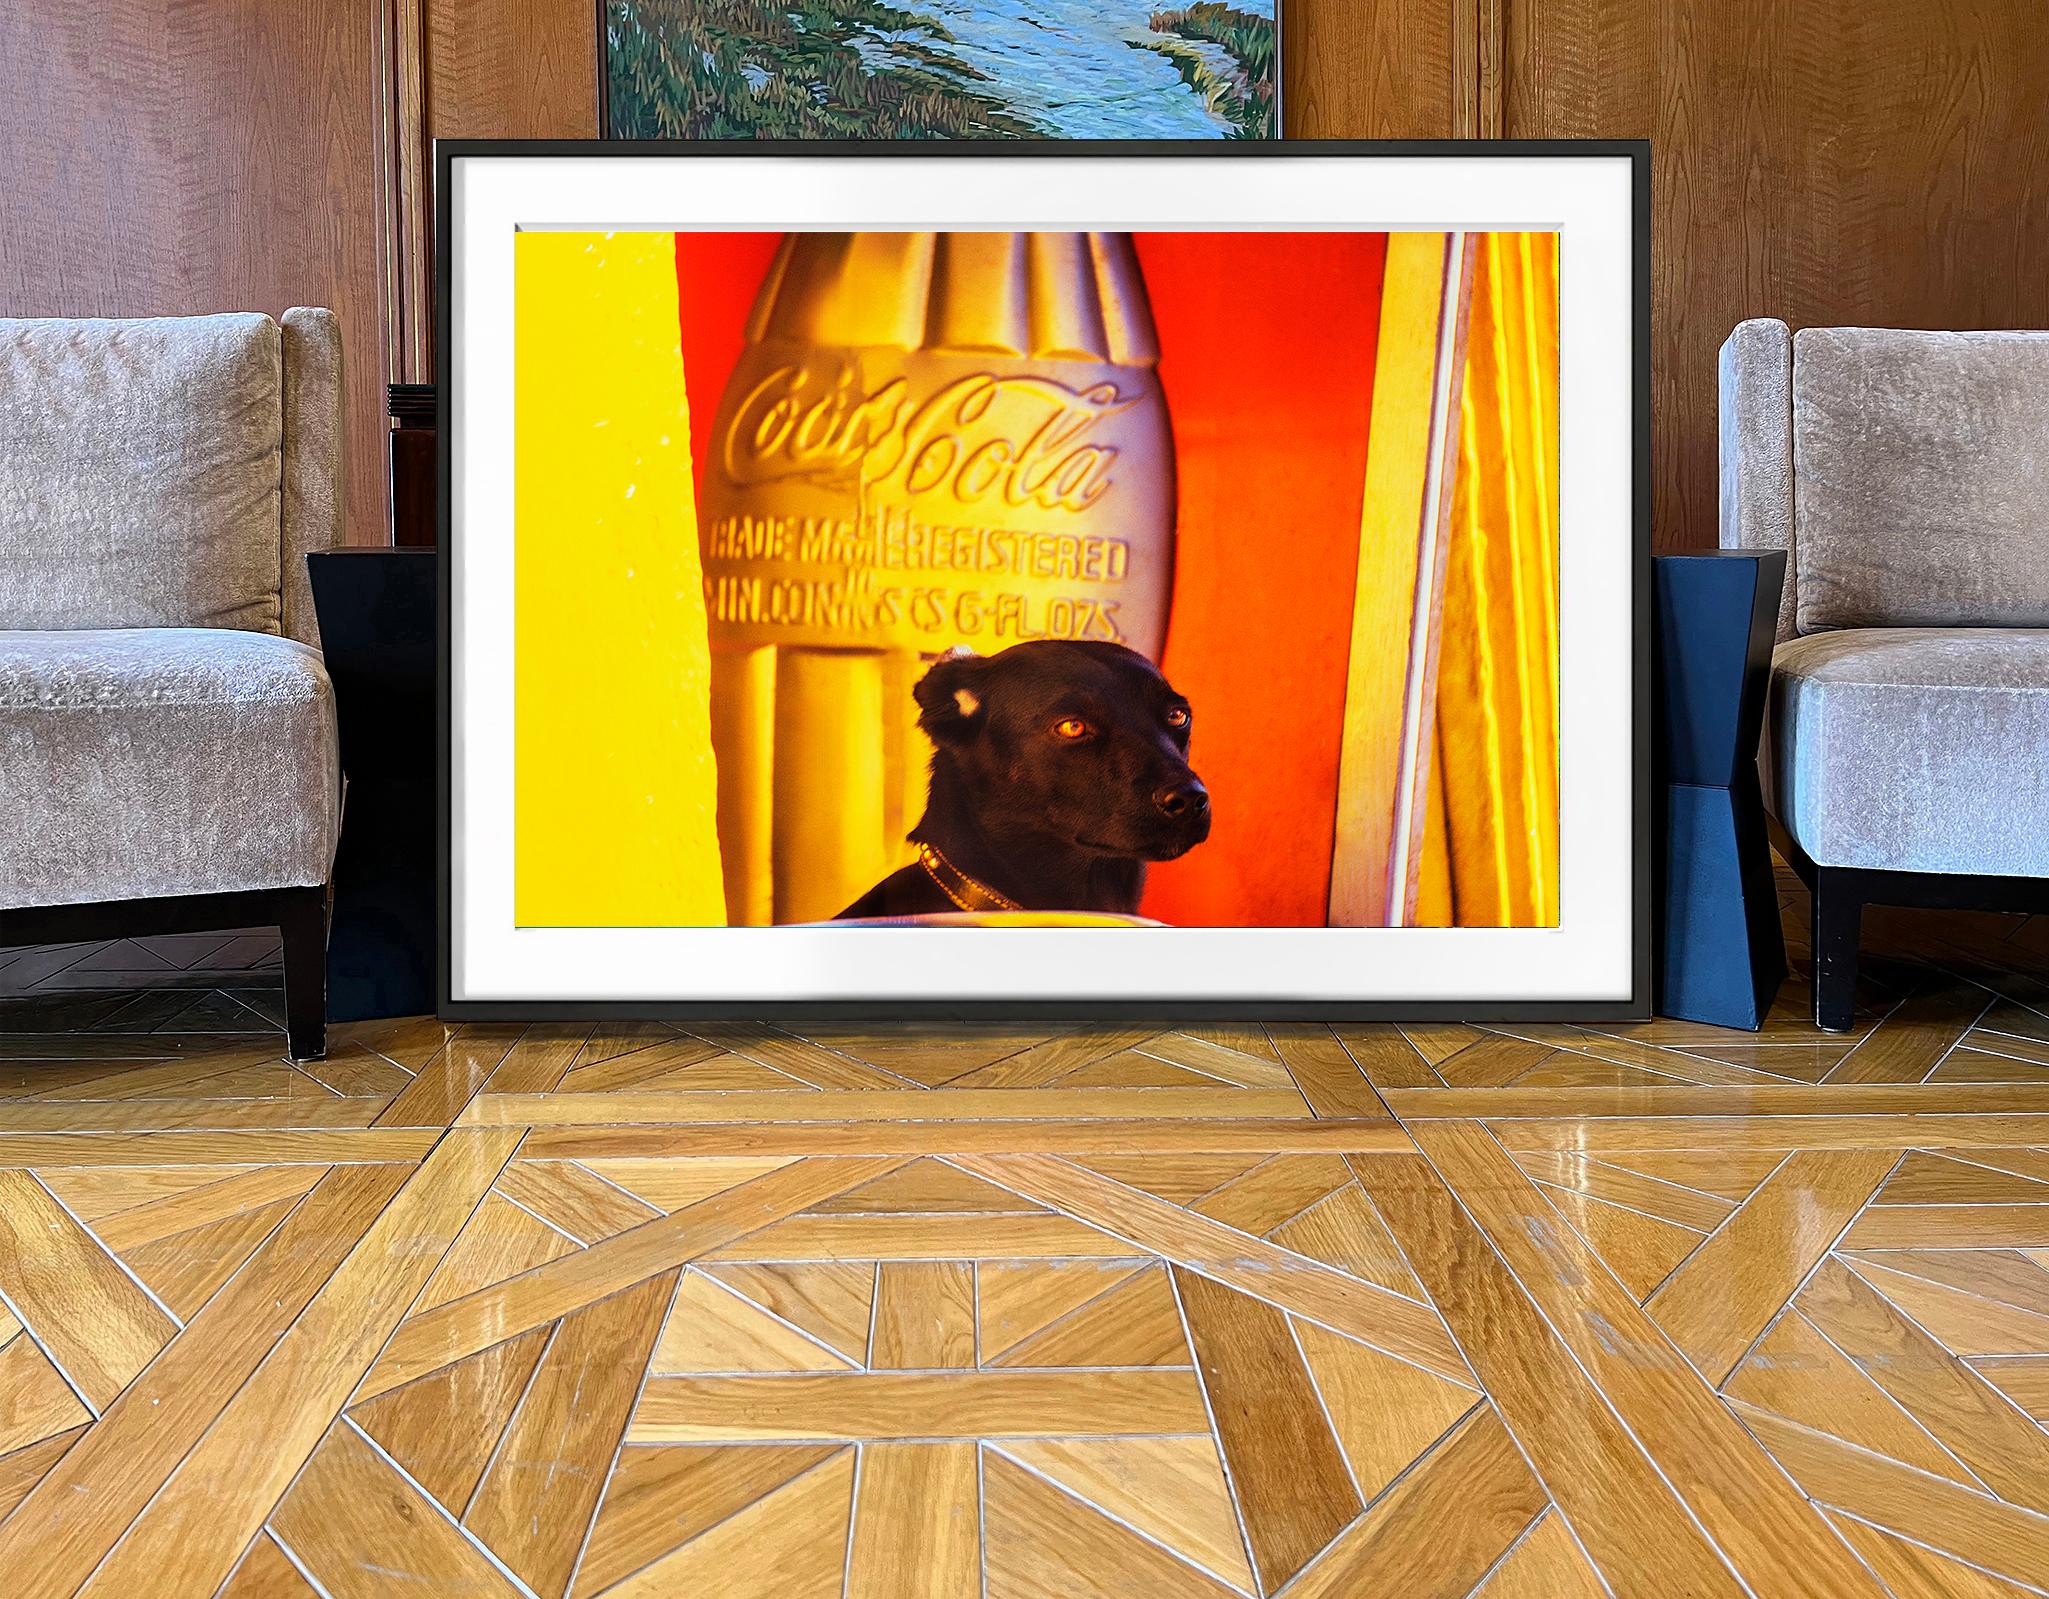 Cute Black Dog Against a Graphic Yellow Orange Wall in Mexico - Photograph by Mitchell Funk